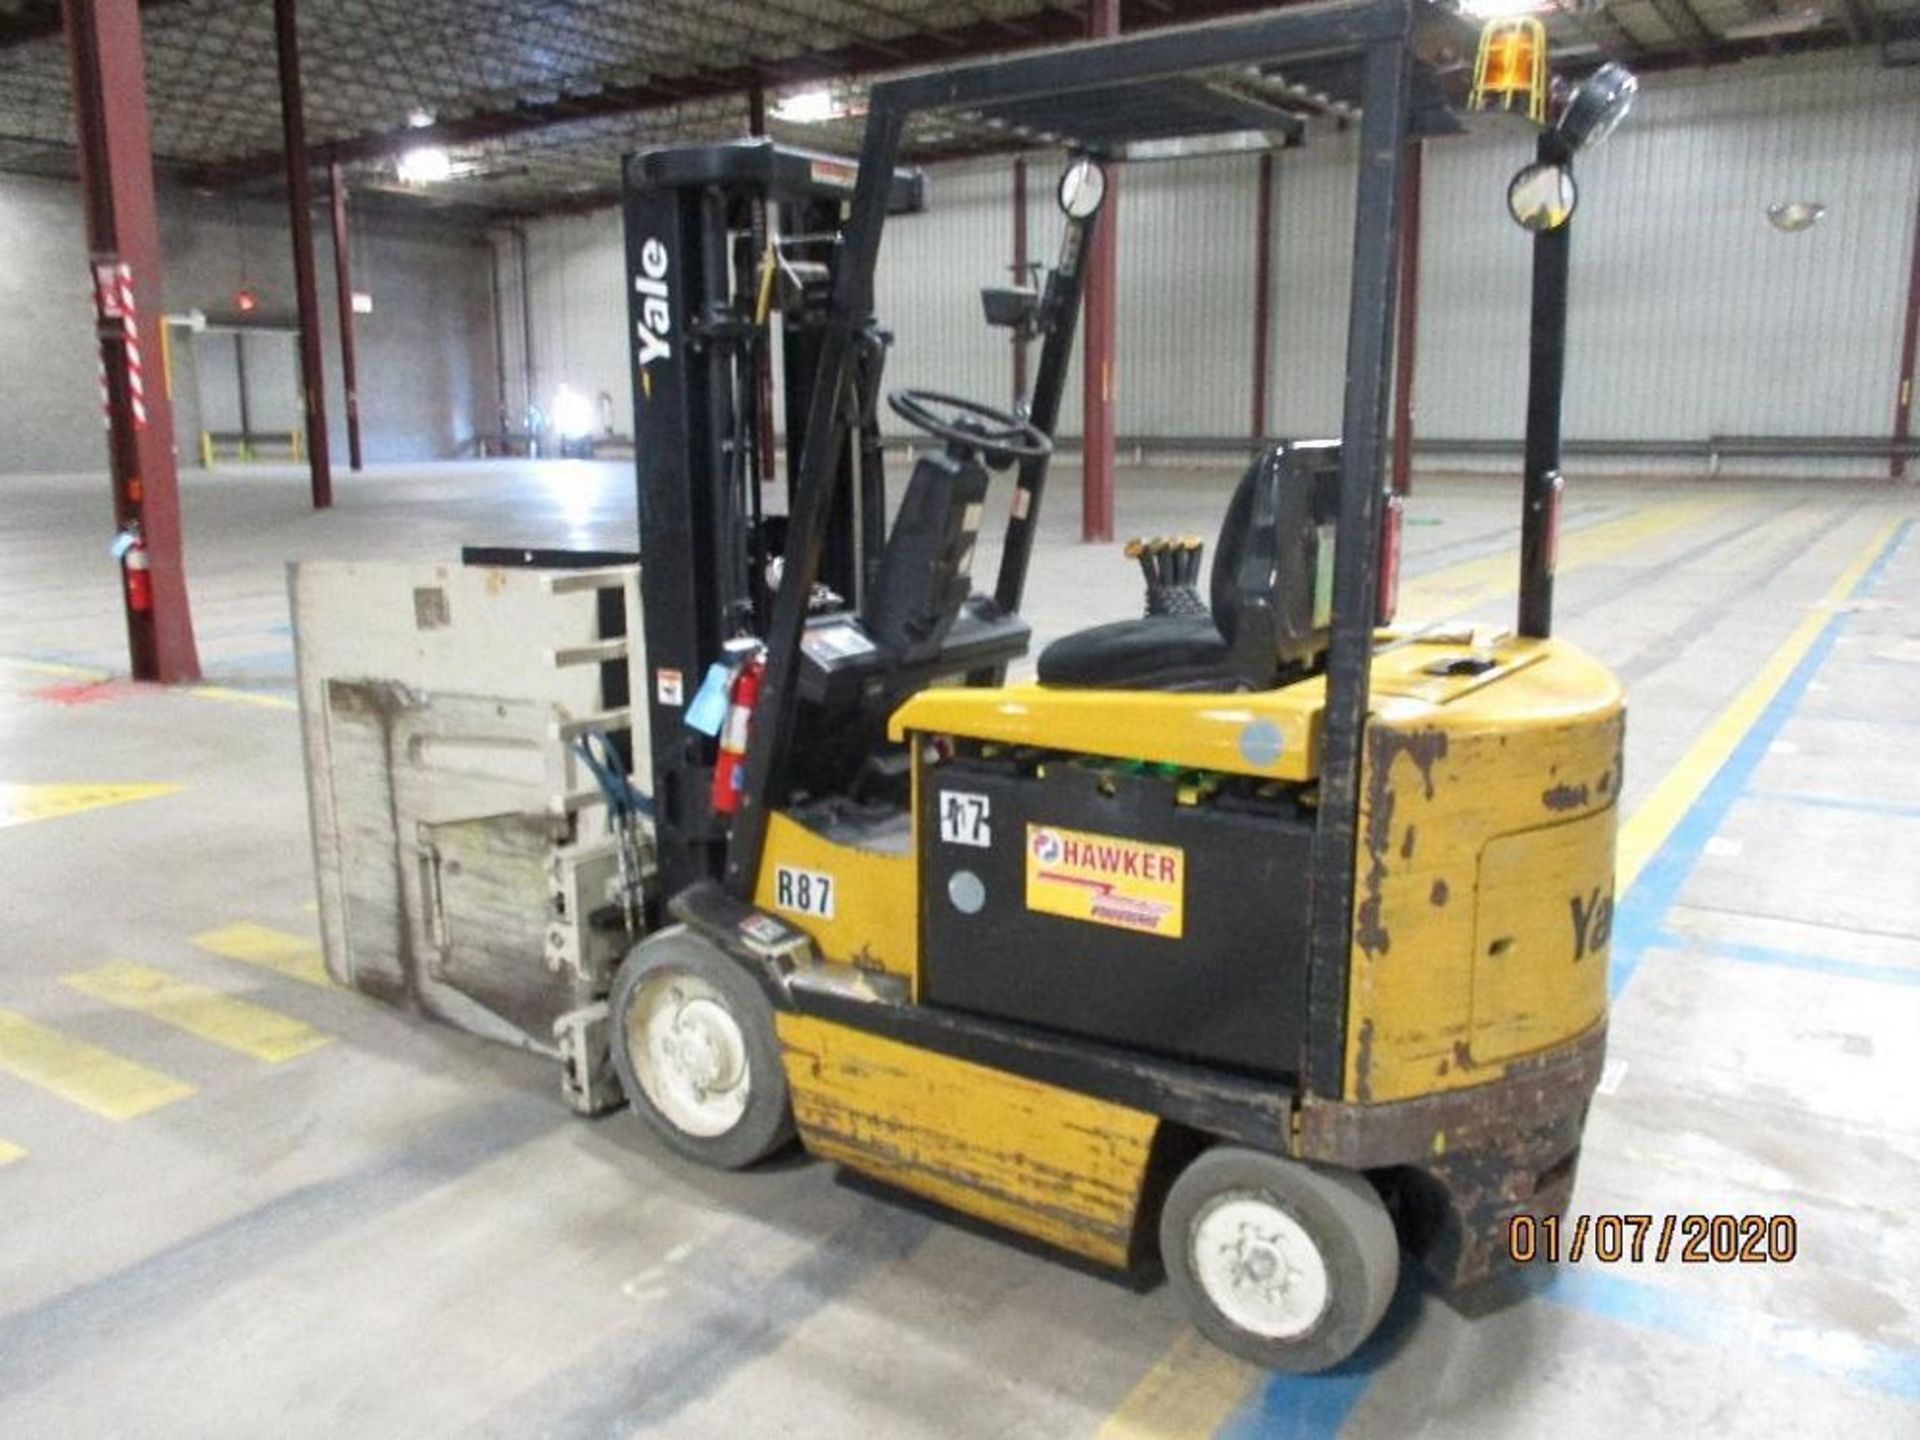 Yale Electric Forklift (R87) Double Mast, Side Shift, Cascade Clamp Attachment 4' x 4', Approx. Heig - Image 4 of 7